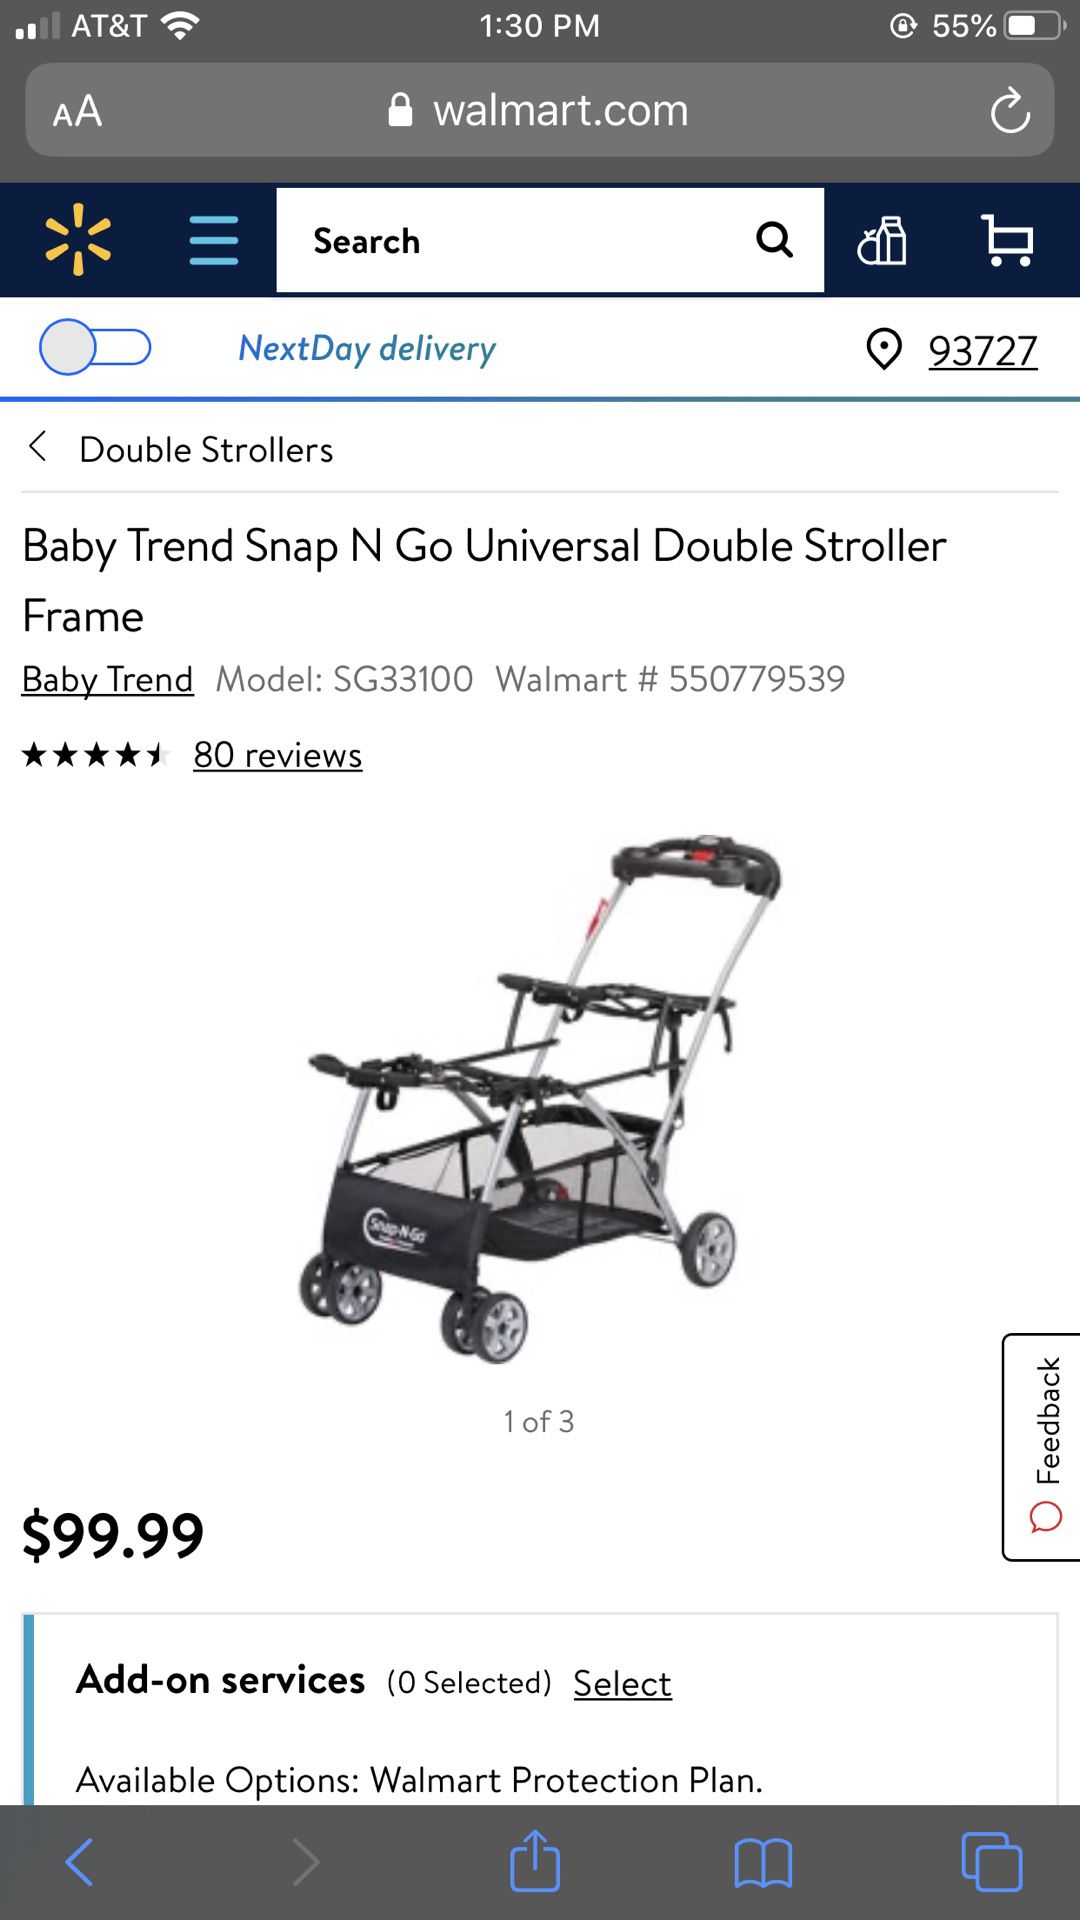 Double snap m go stroller frame and two baby trend infant car seats w/bases . Perfect for twins!